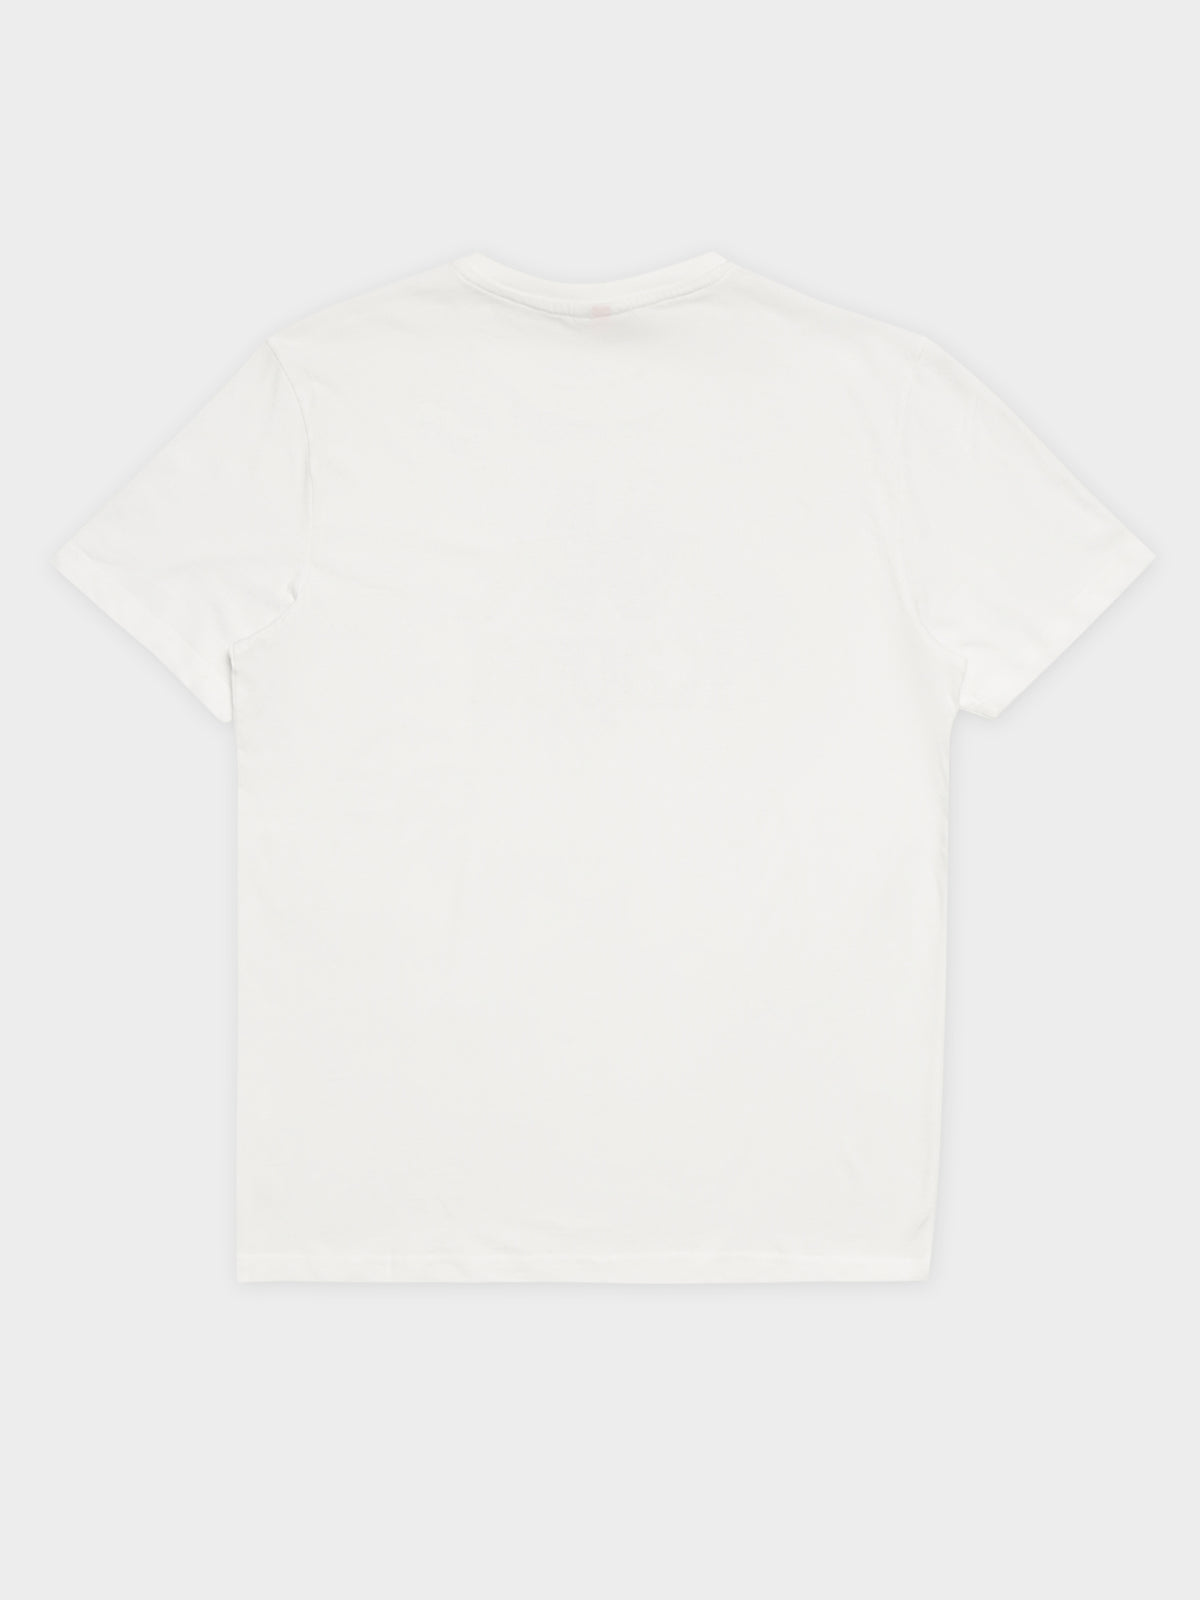 Authentic Ralo Slim-Fit T-Shirt in White